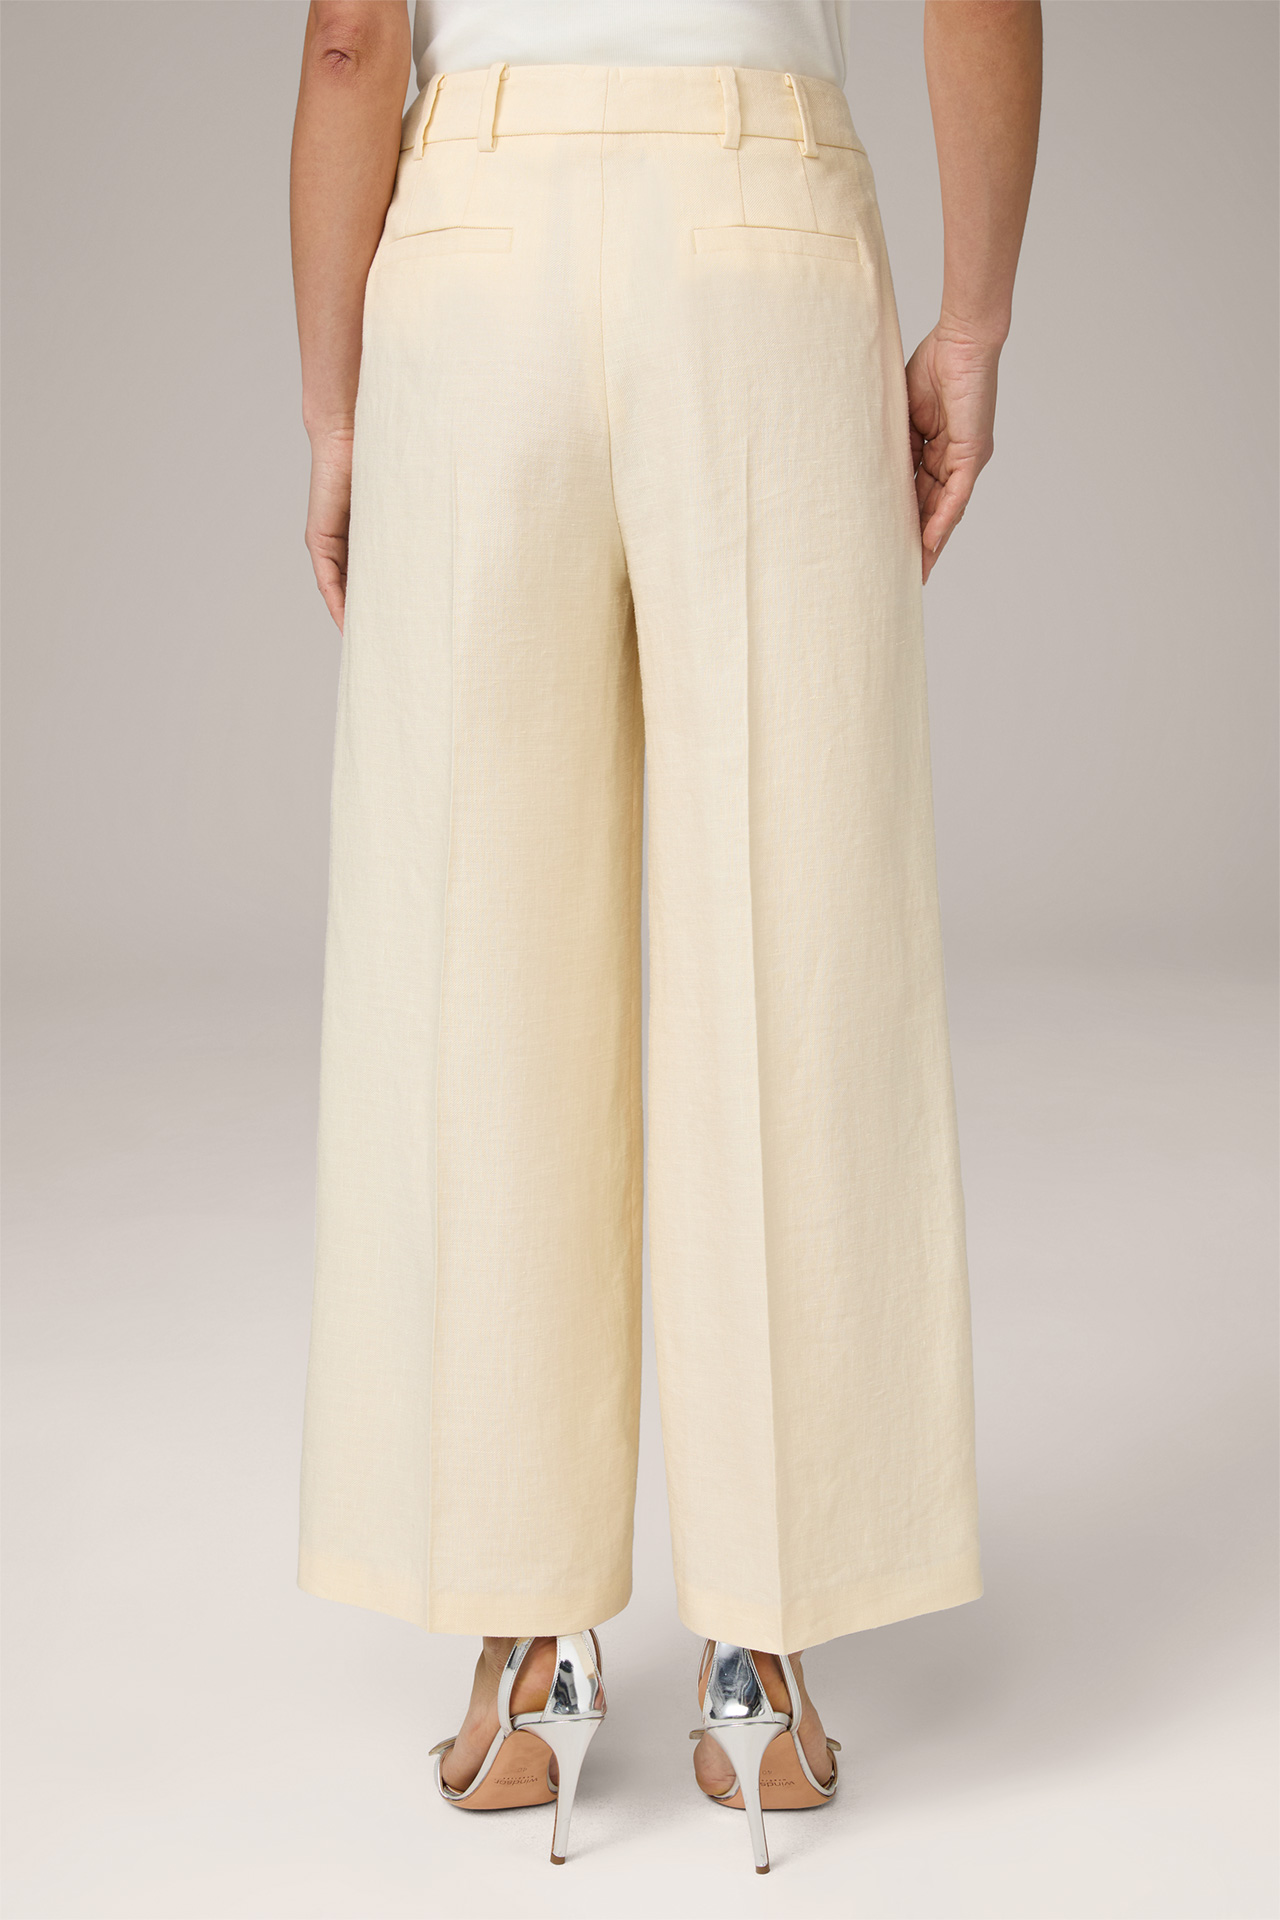 Linen Stretch Palazzo Trousers, cropped, in pale yellow